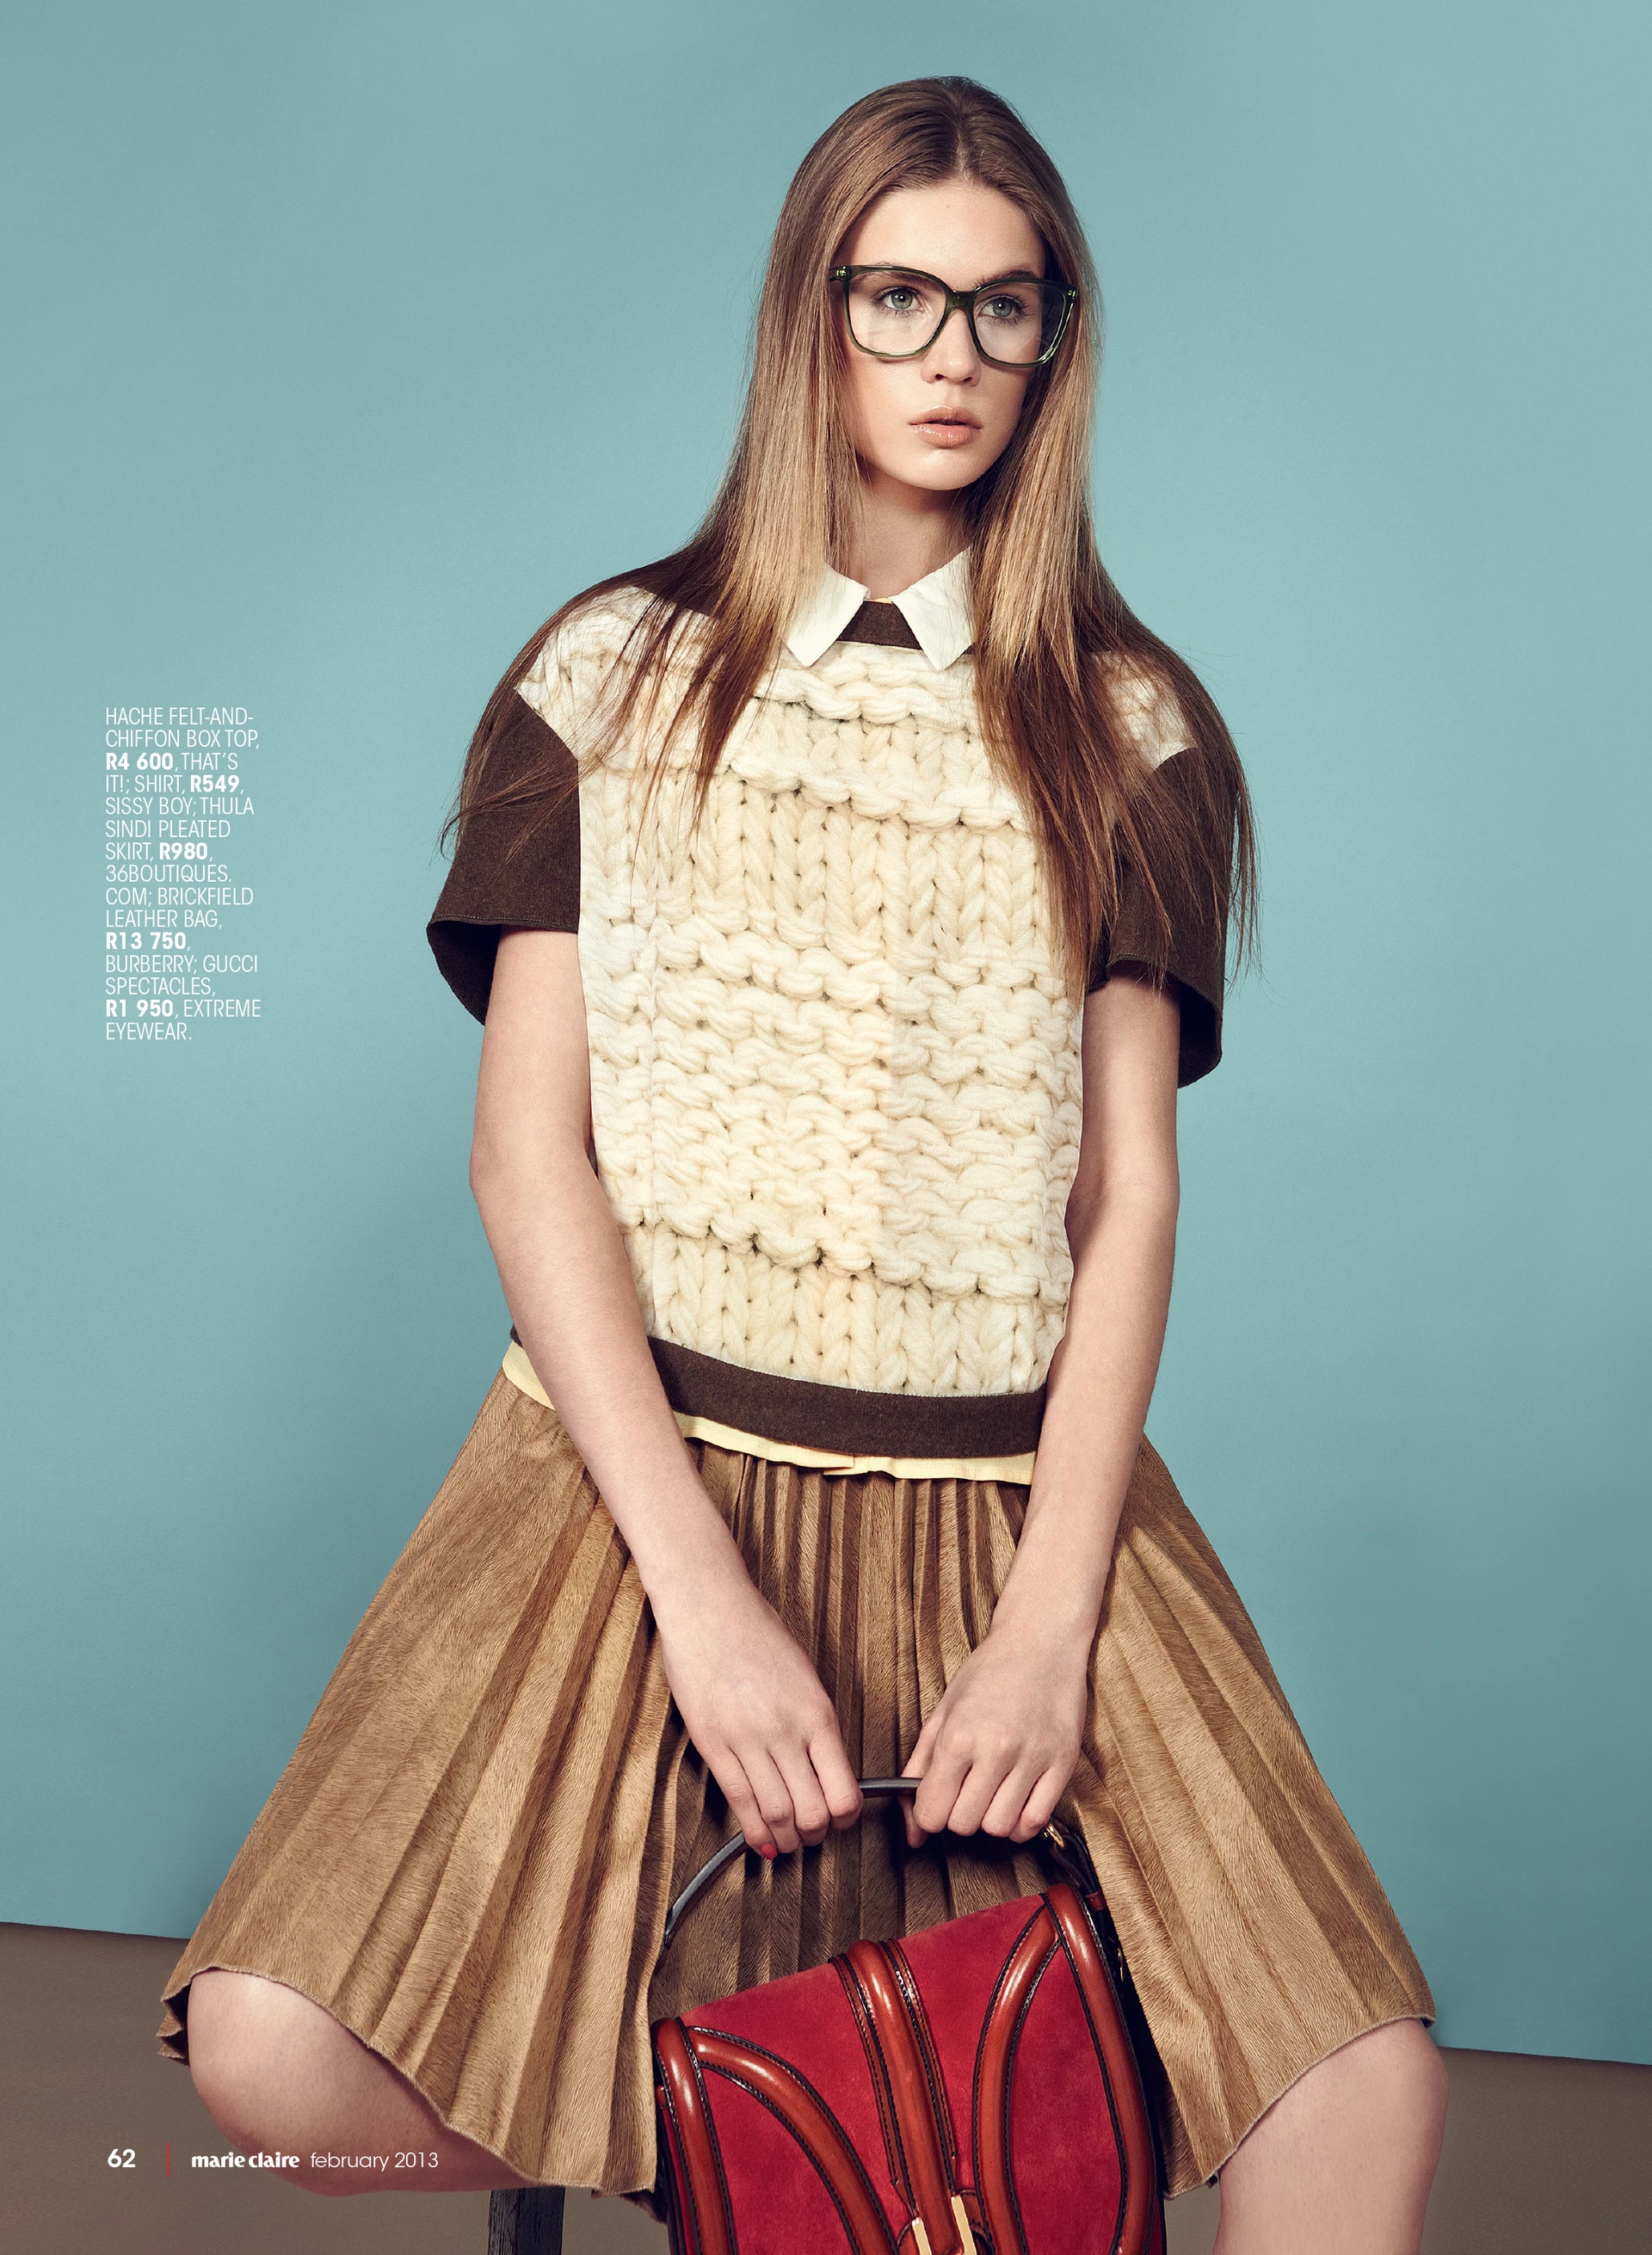 Young woman in a chic white knitted top and brown skirt, wearing glasses, holding a red leather bag against a teal background. Fashion shoot for Marie Claire February 2013.